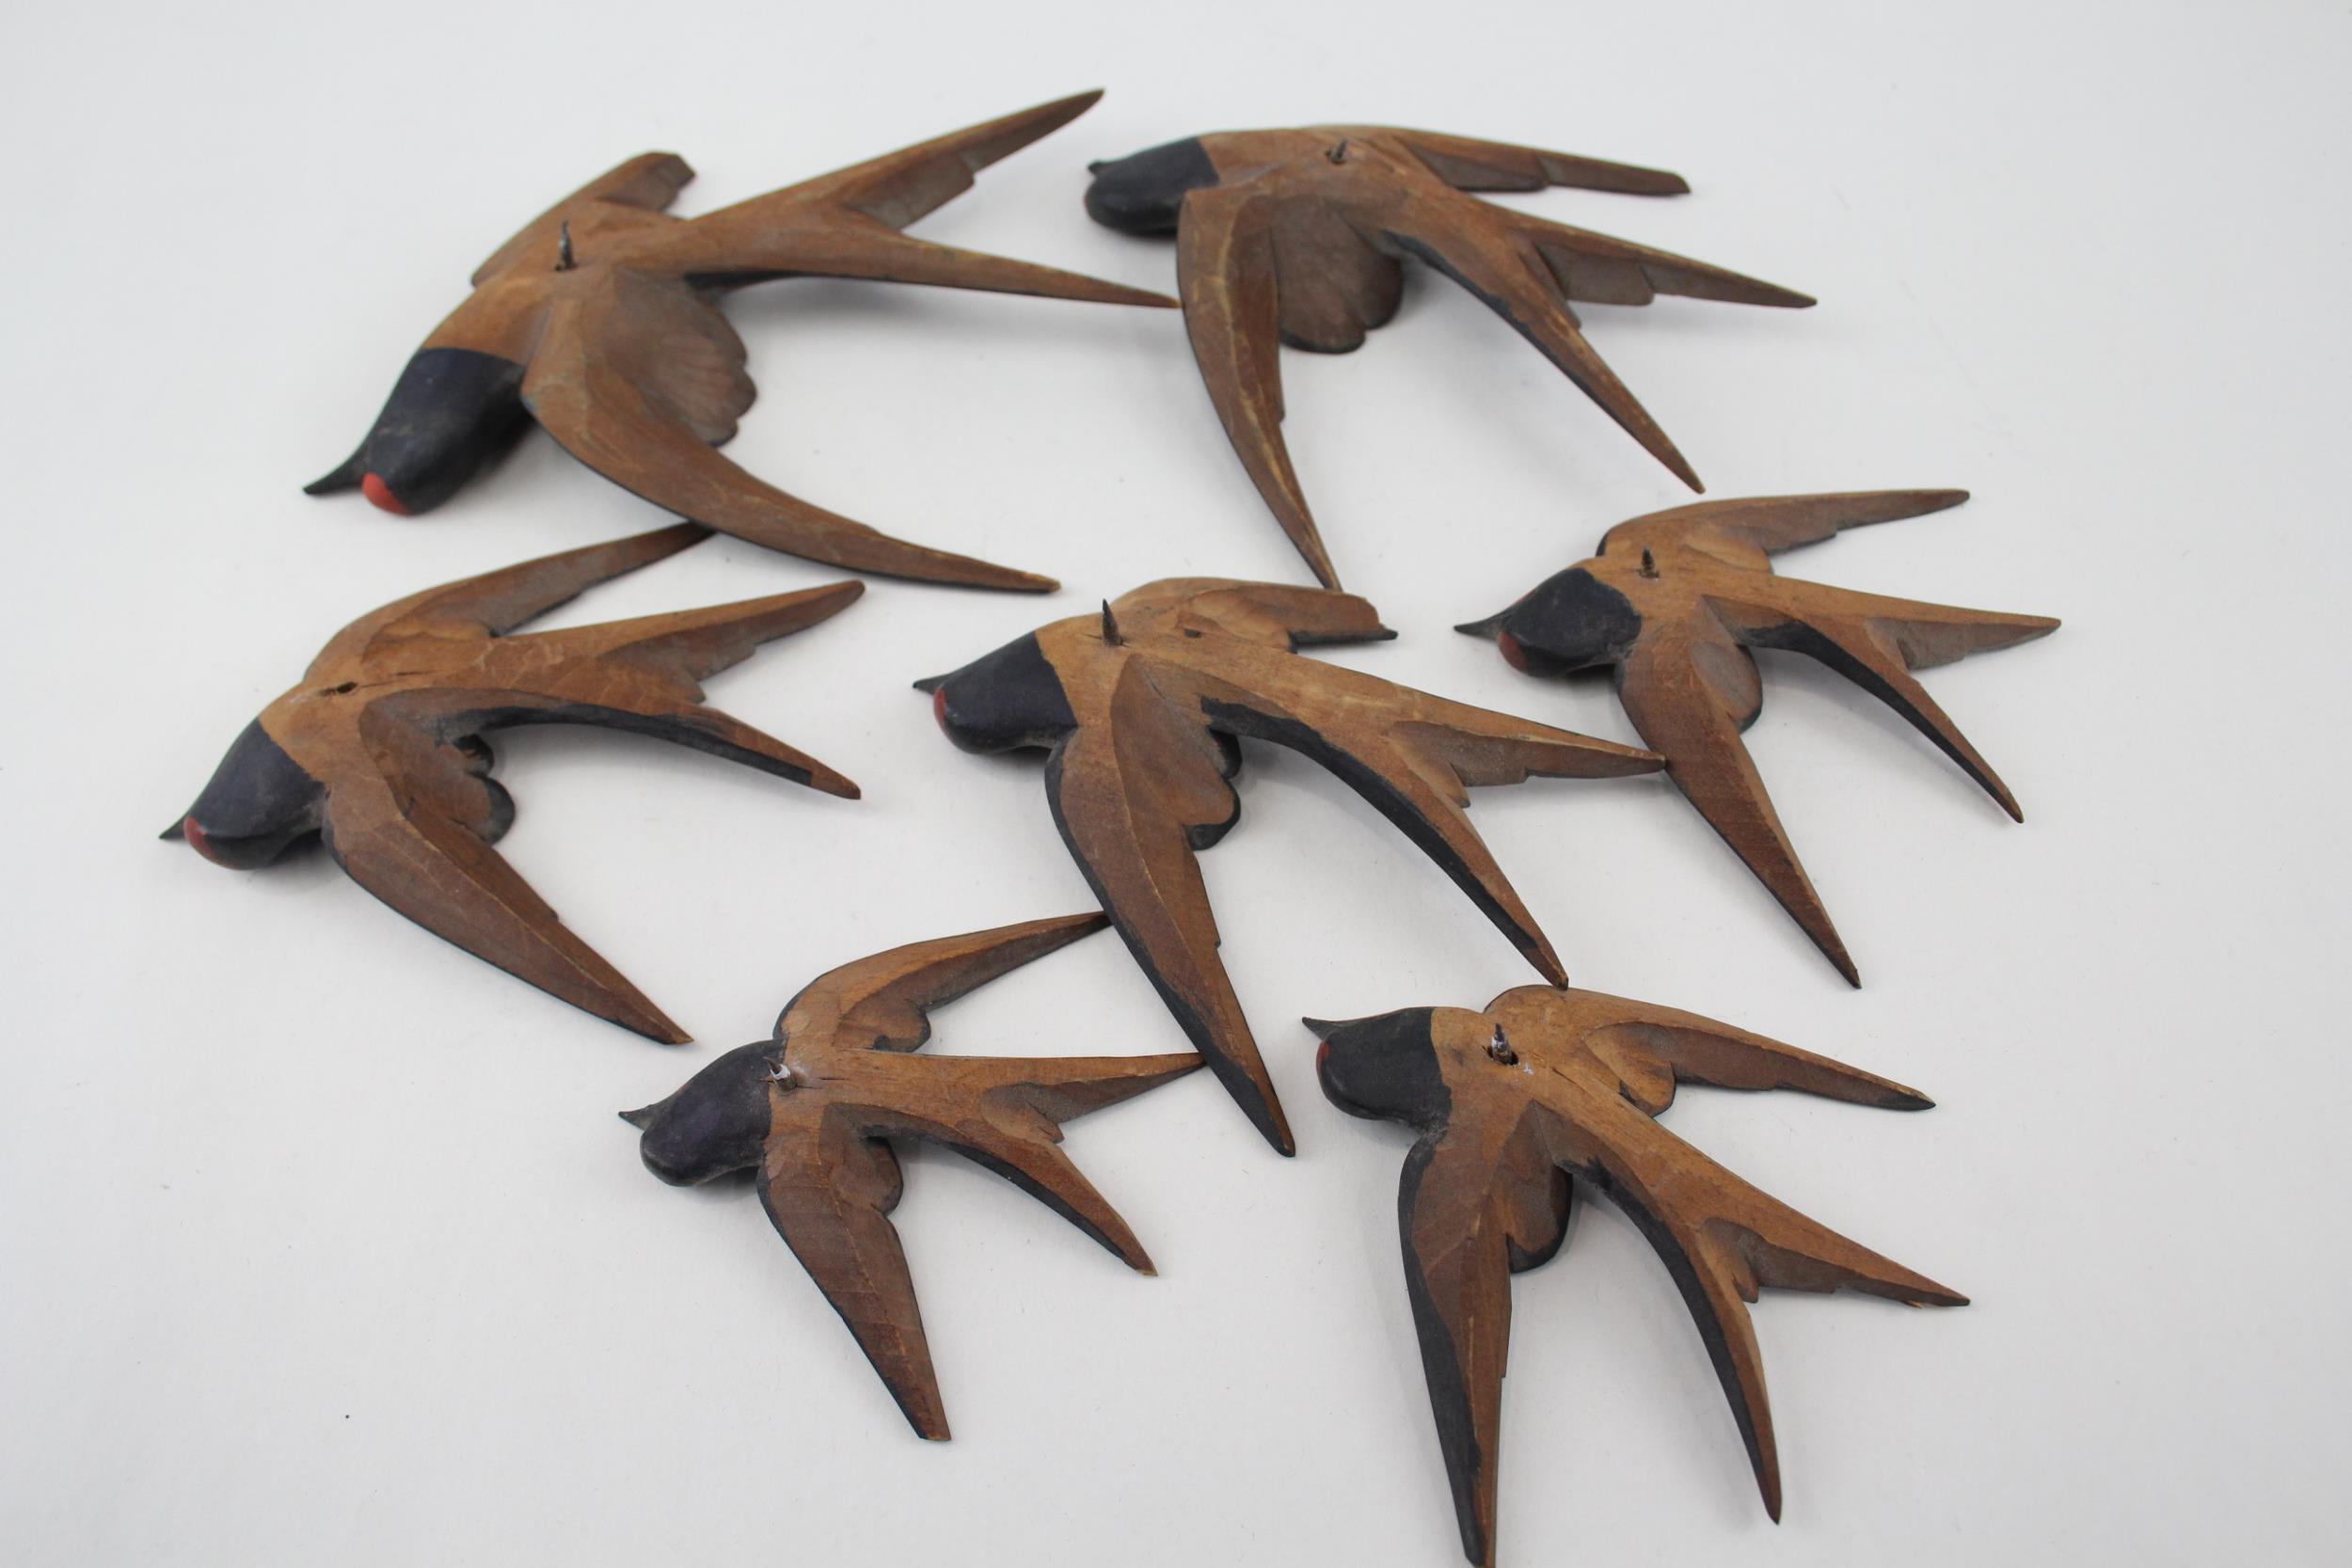 7 x Antique Hand Carded African Wooden Birds In Flight Wall Decorations - Diameter of Largest - 14cm - Image 9 of 9